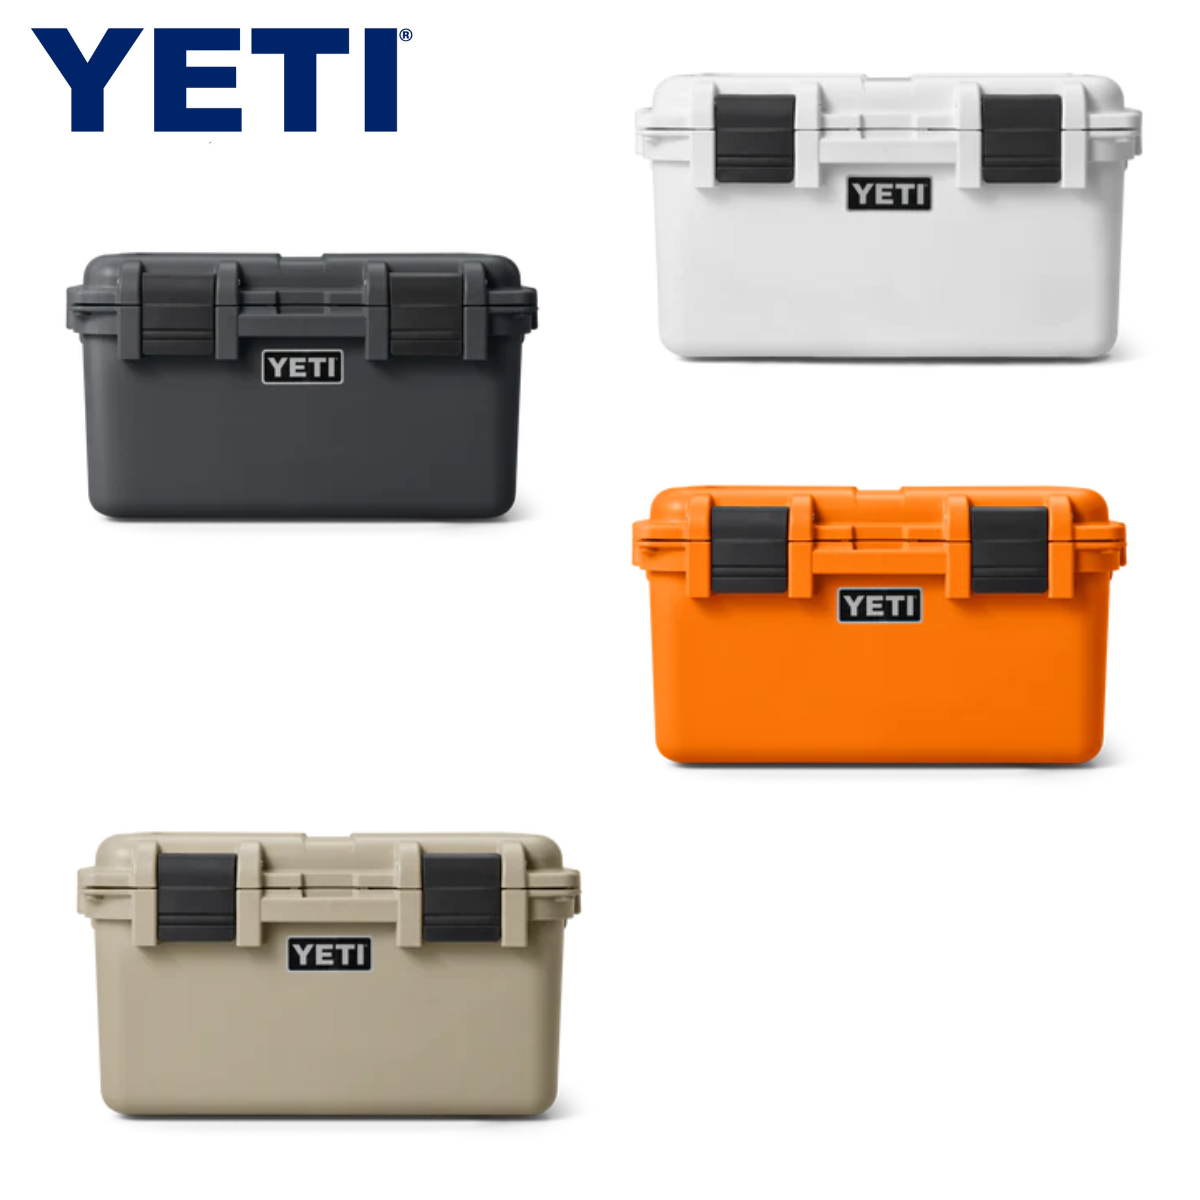 Yeti DayTrip Lunch Box - The Compleat Angler